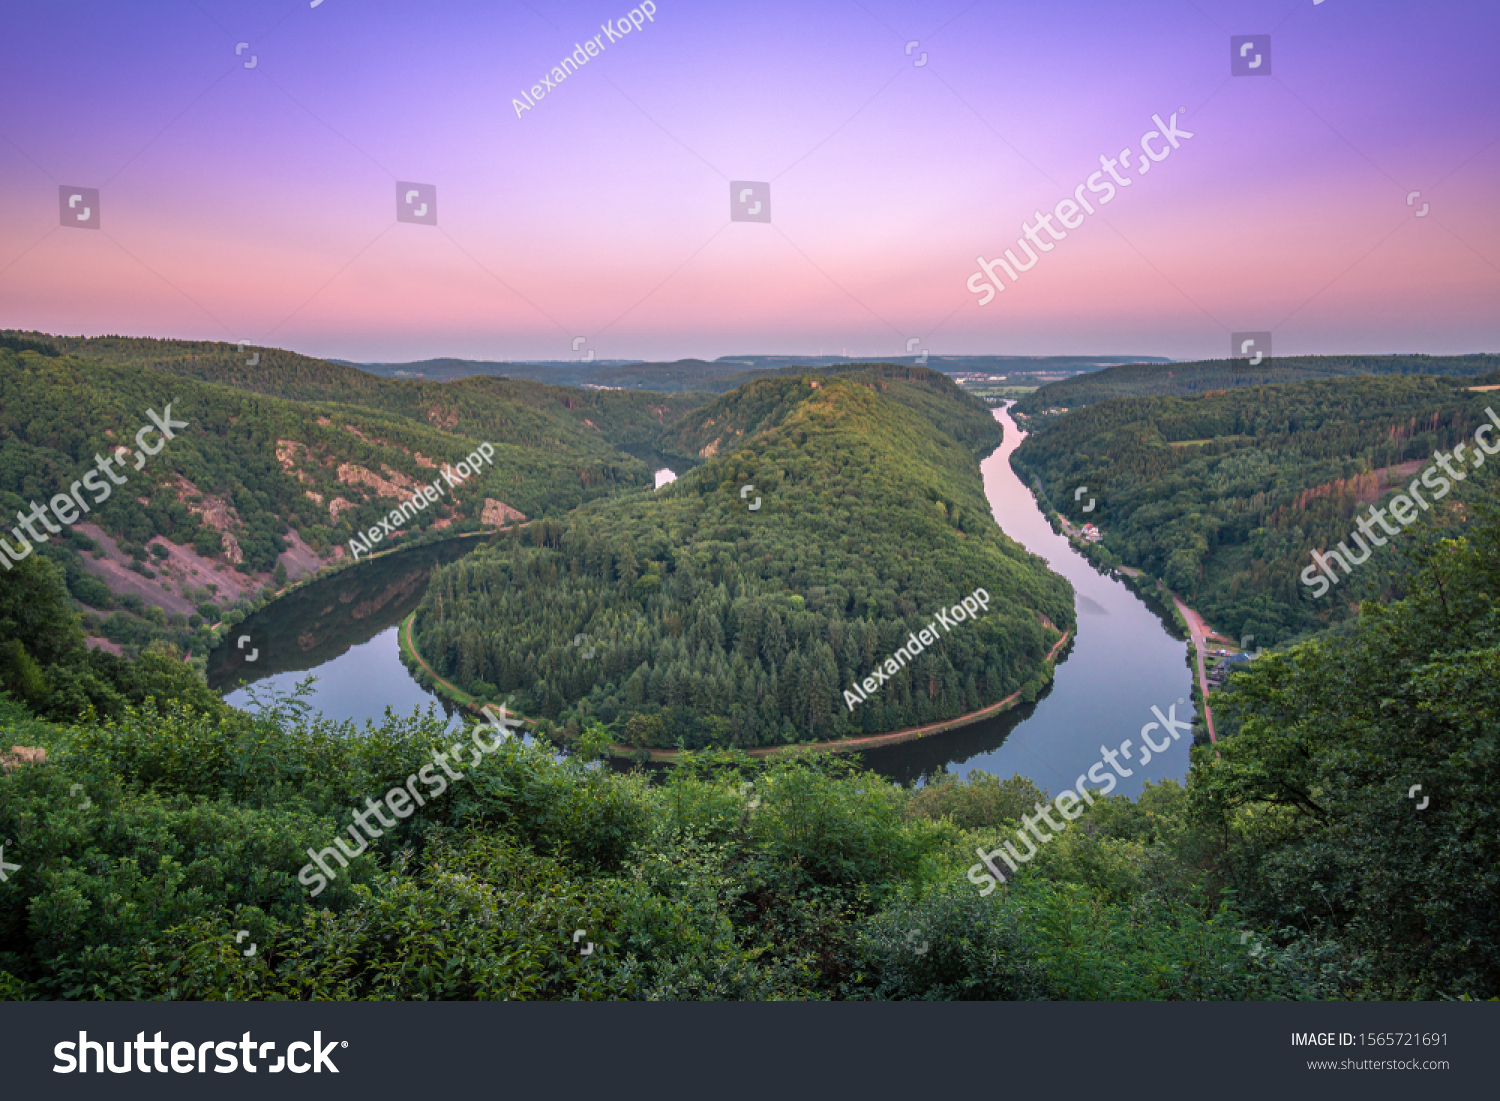 The "Saarschleife" of Saarland, Germany at the sunset. The place where the river Saar makes a turn. #1565721691